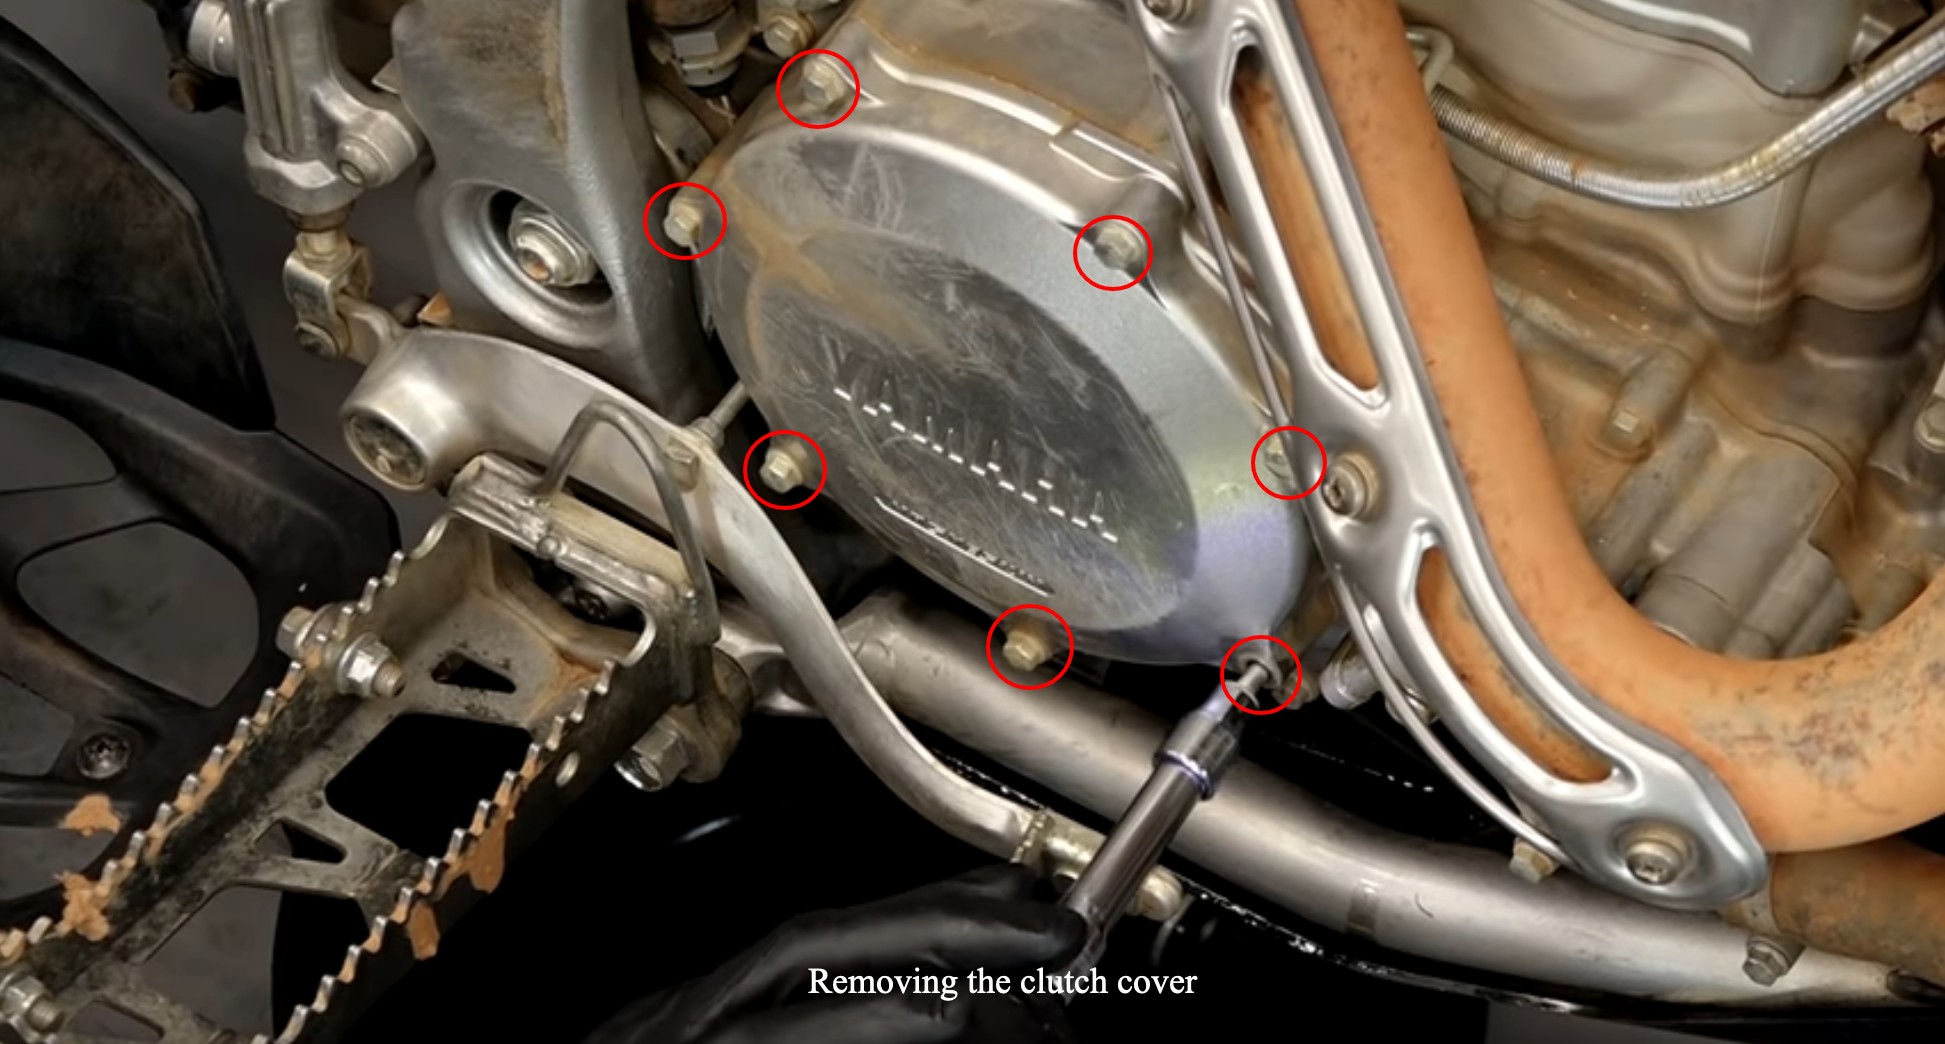 Yamaha YFZ450 clutch cover removal